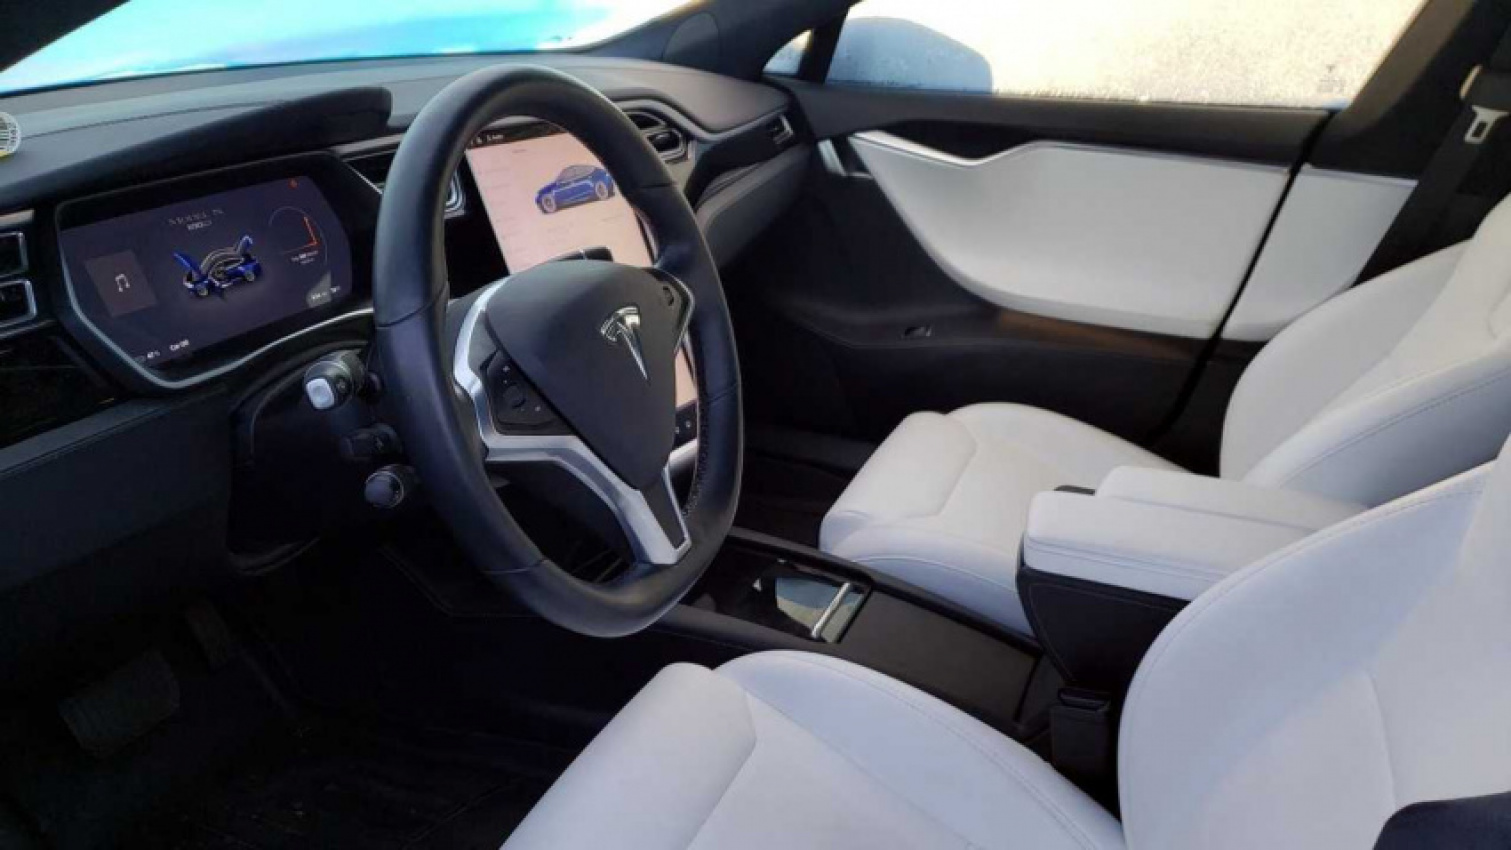 autos, cars, tesla, tesla model s, all the money: this high-mileage 2018 tesla model s sold for over $50,000